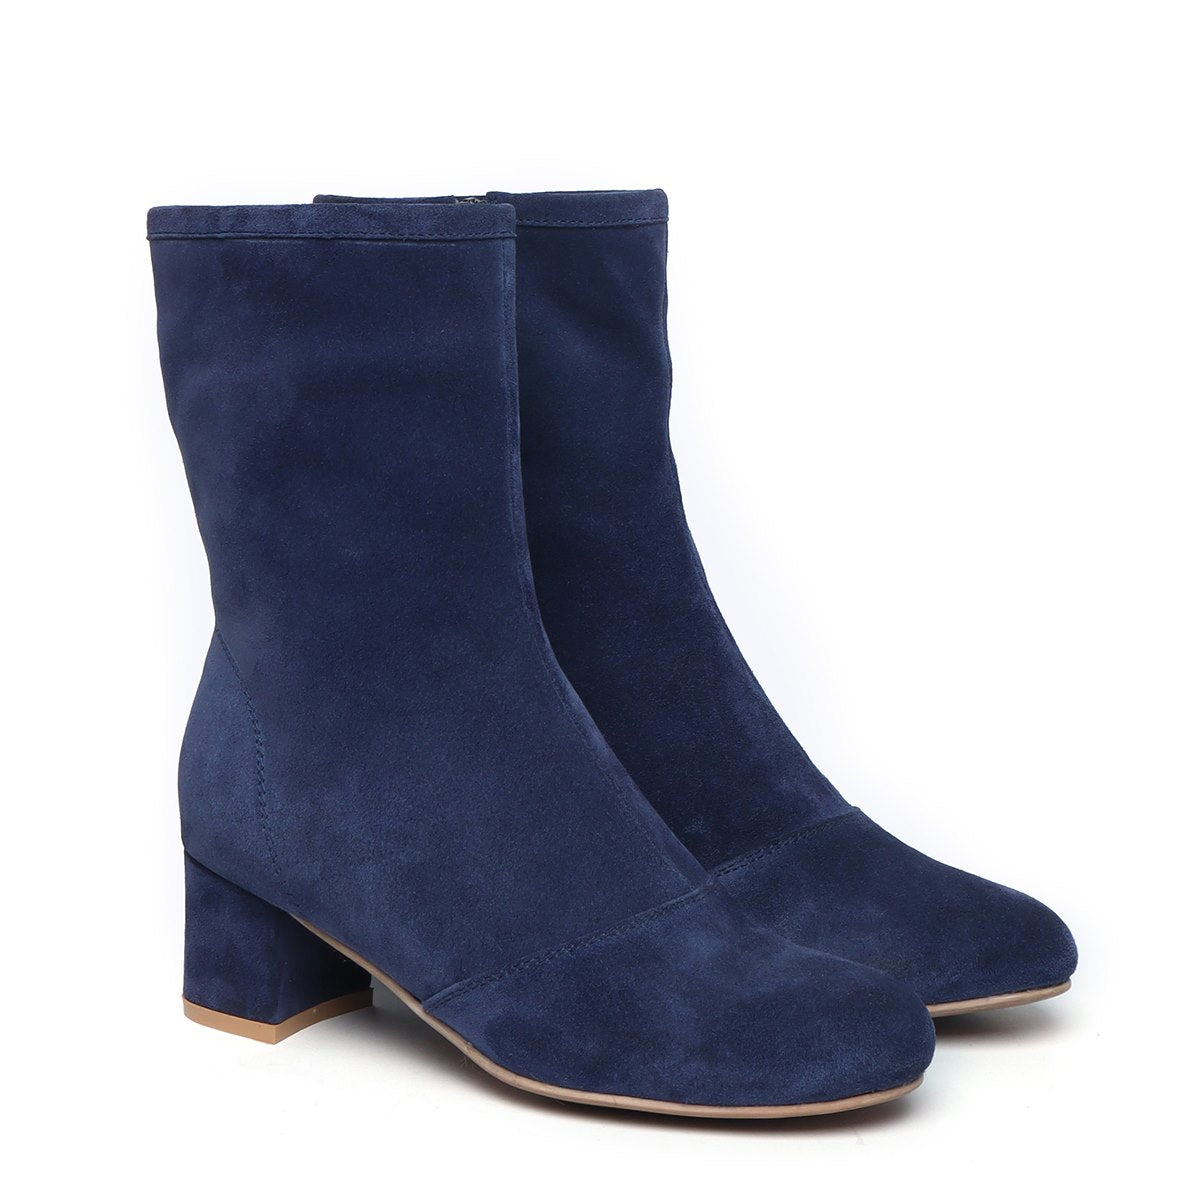 Blue Suede Leather High Ankle Ladies Boots By Brune & Bareskin